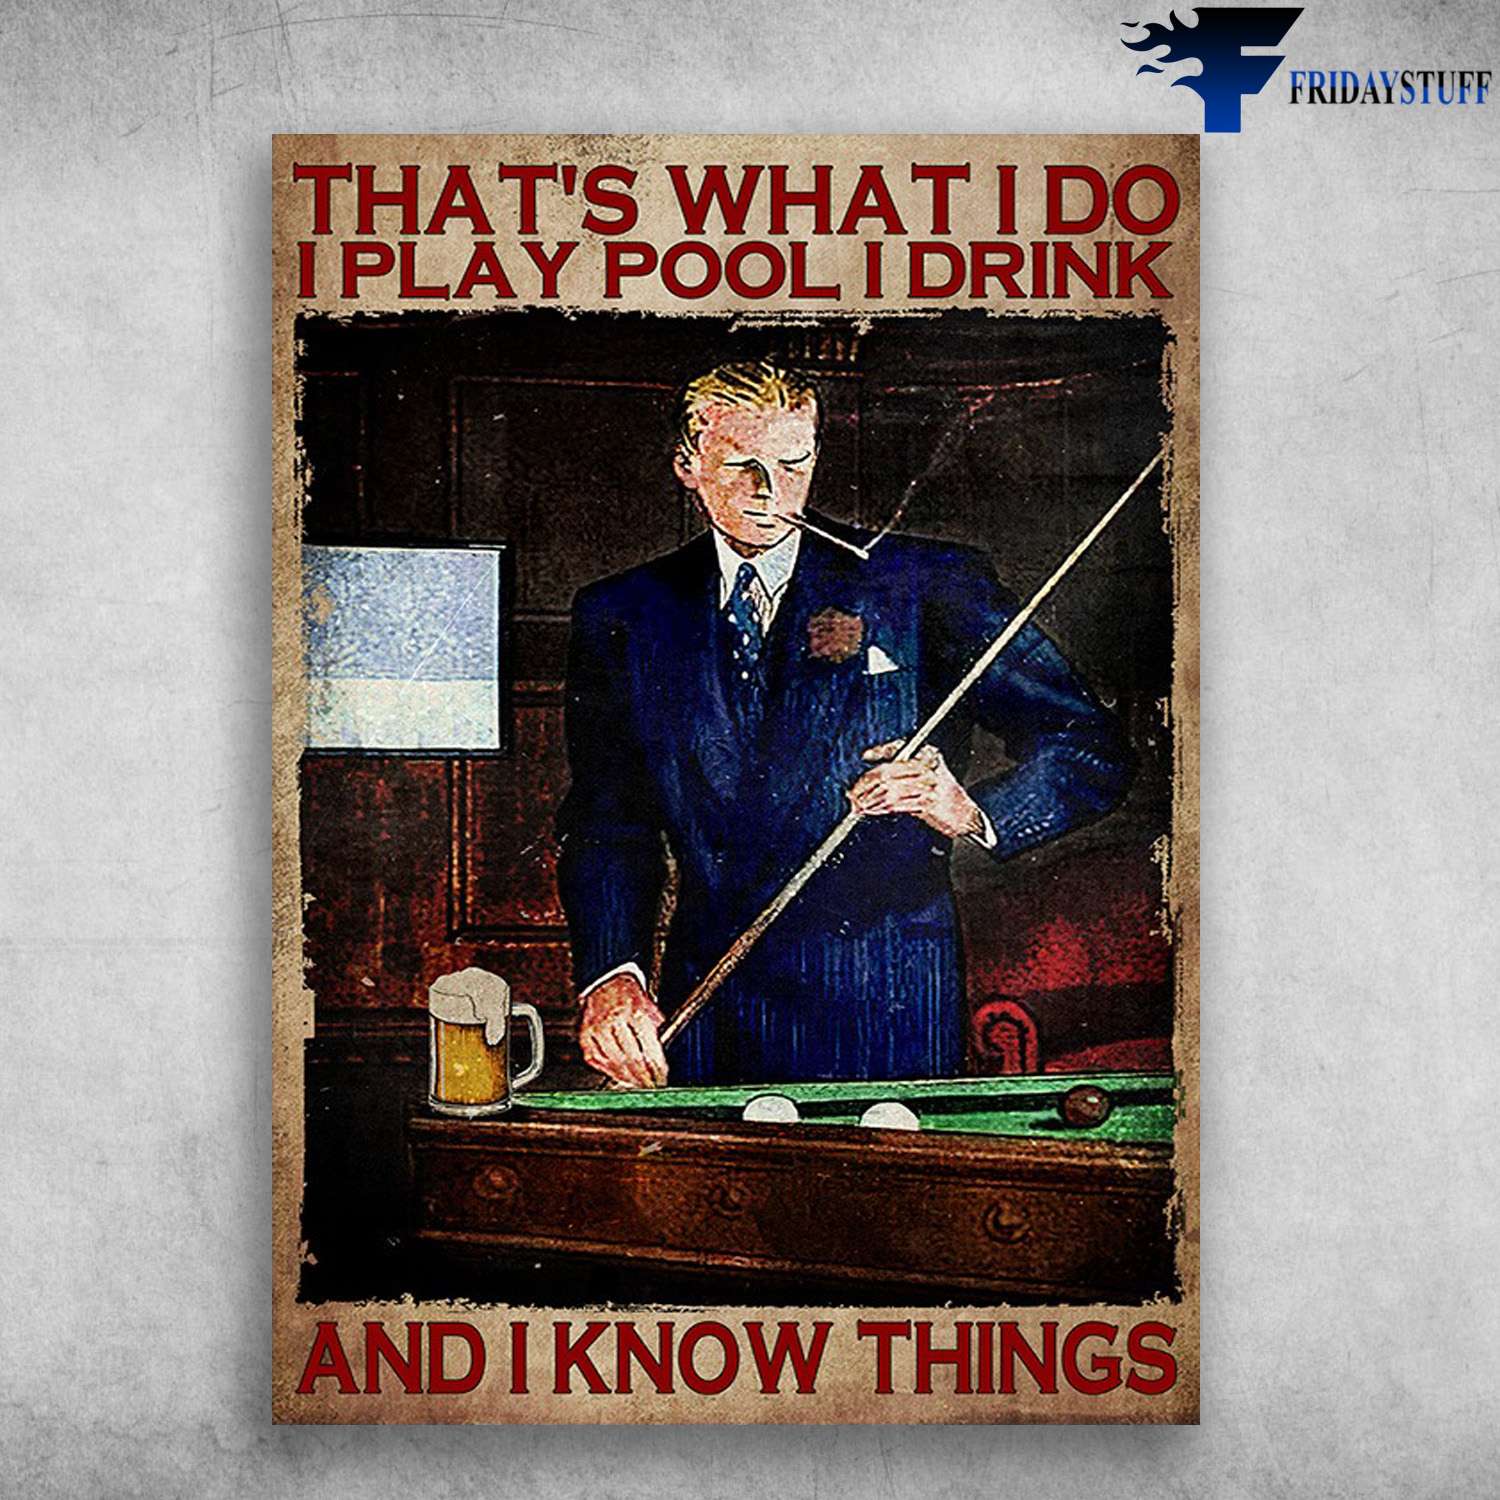 Billiard And Beer - That's What I Do, I Play Pool, I Drink, And I Know Things